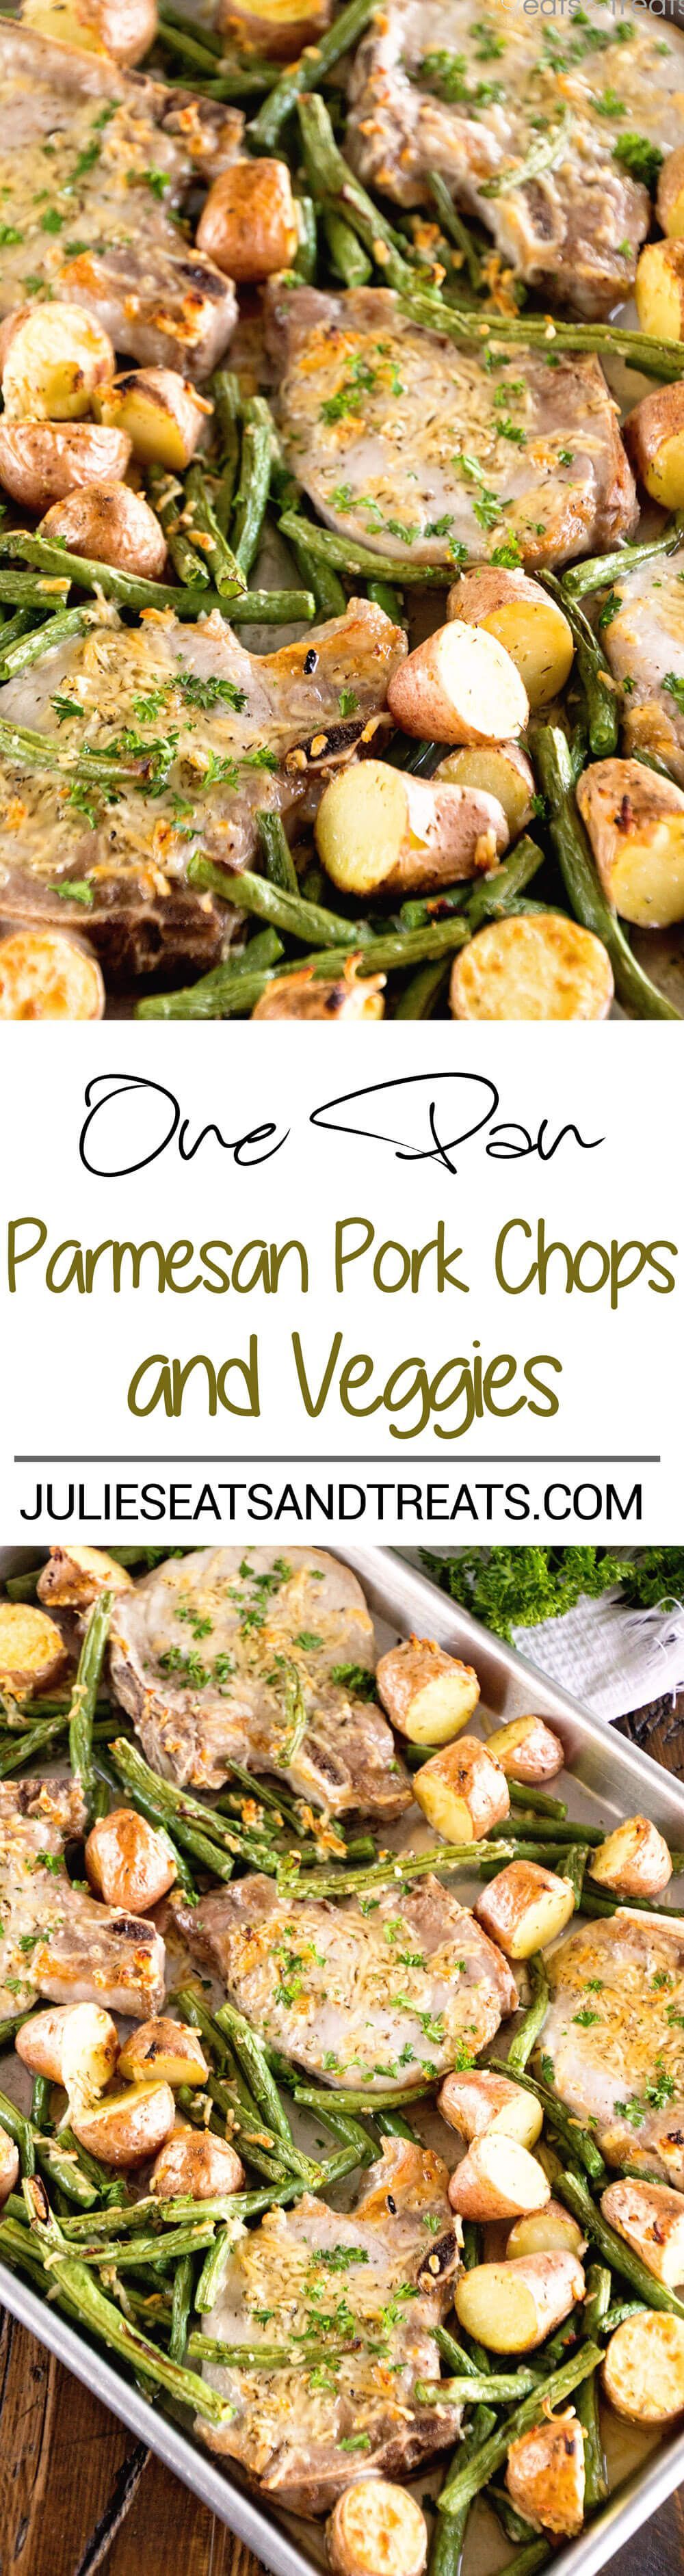 One Pan Parmesan Pork Chops and Veggies Recipe ~ Juicy Pork Chops Baked in the Oven with Potatoes and Veggies Seasoned with